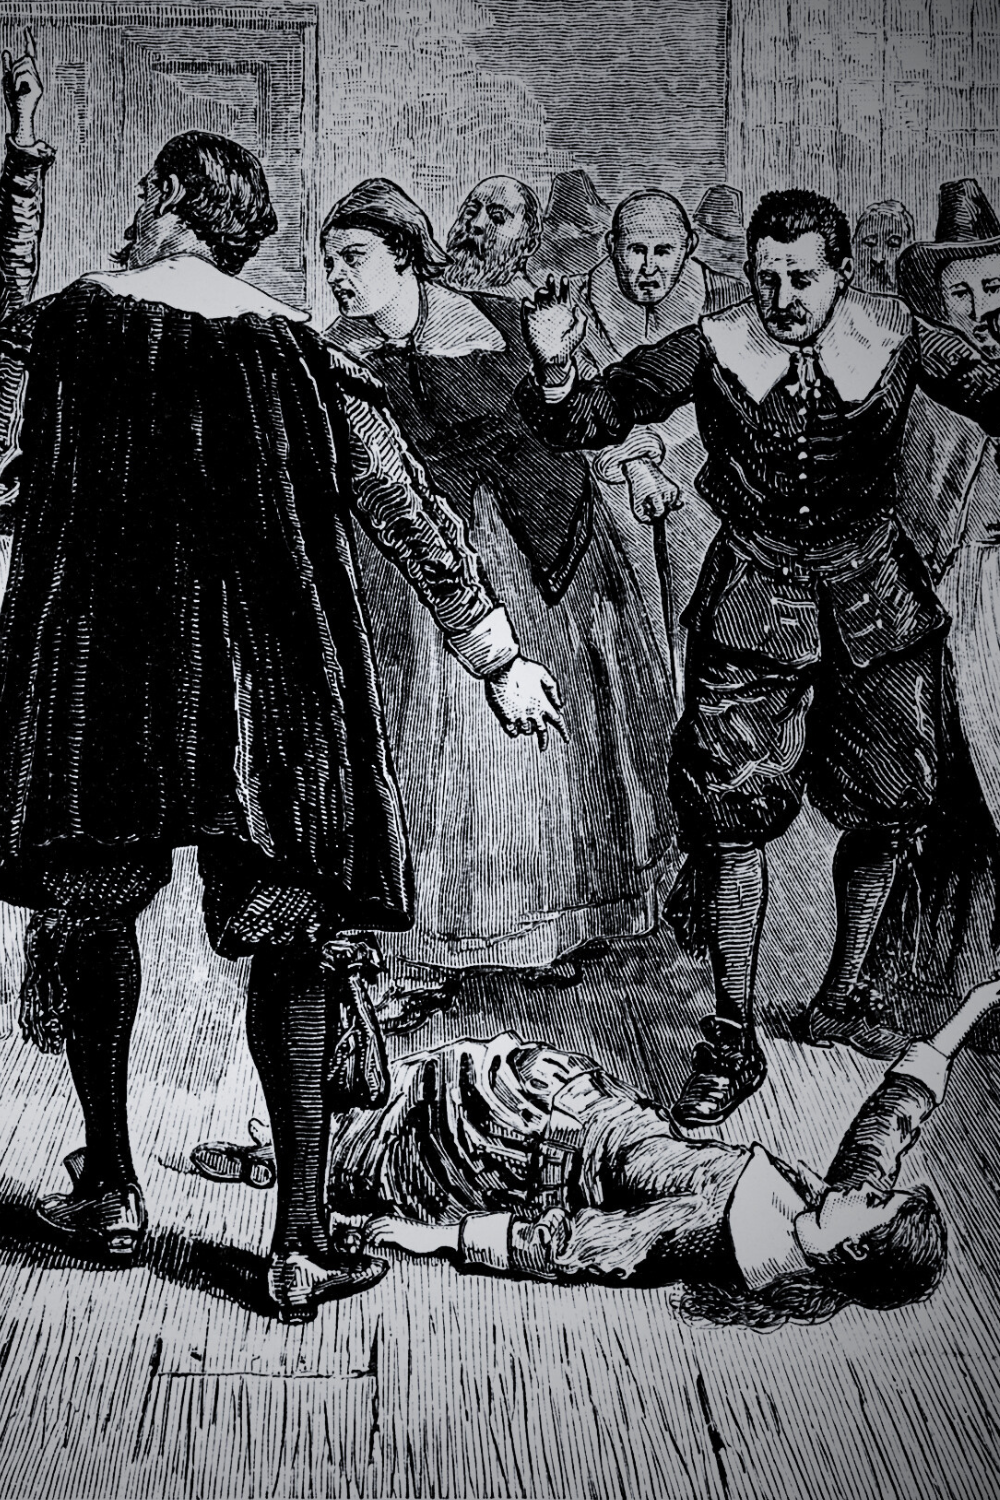 "Illustration of the Salem witch trials, showcasing a courtroom scene included in witch tours in Salem."